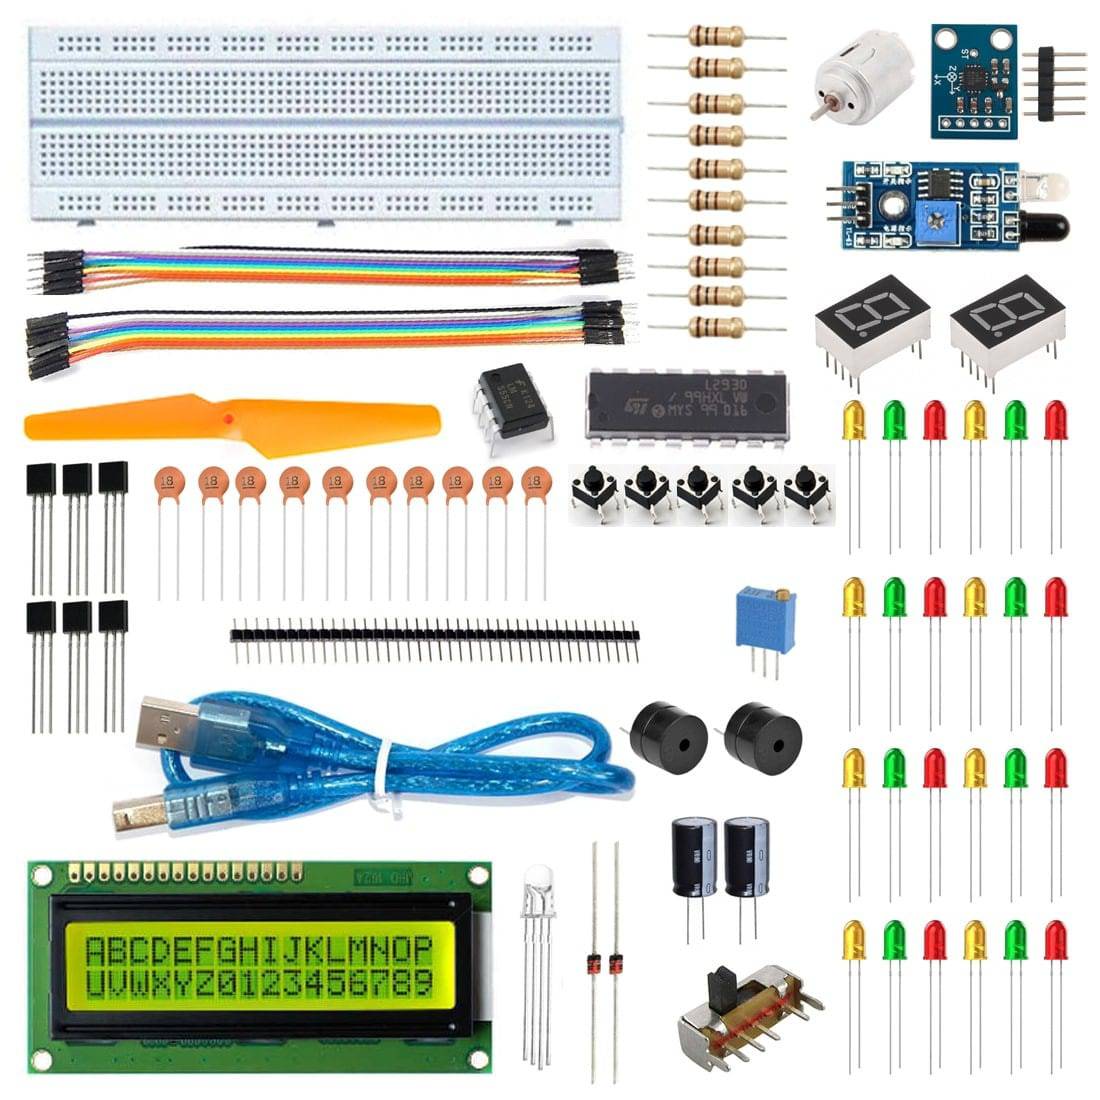 Project Starter Kit for Arduino UNO R3/Mega2560 With Breadboard, Lcd 1602, Buzzer, Motor etc  - KT1010 - REES52